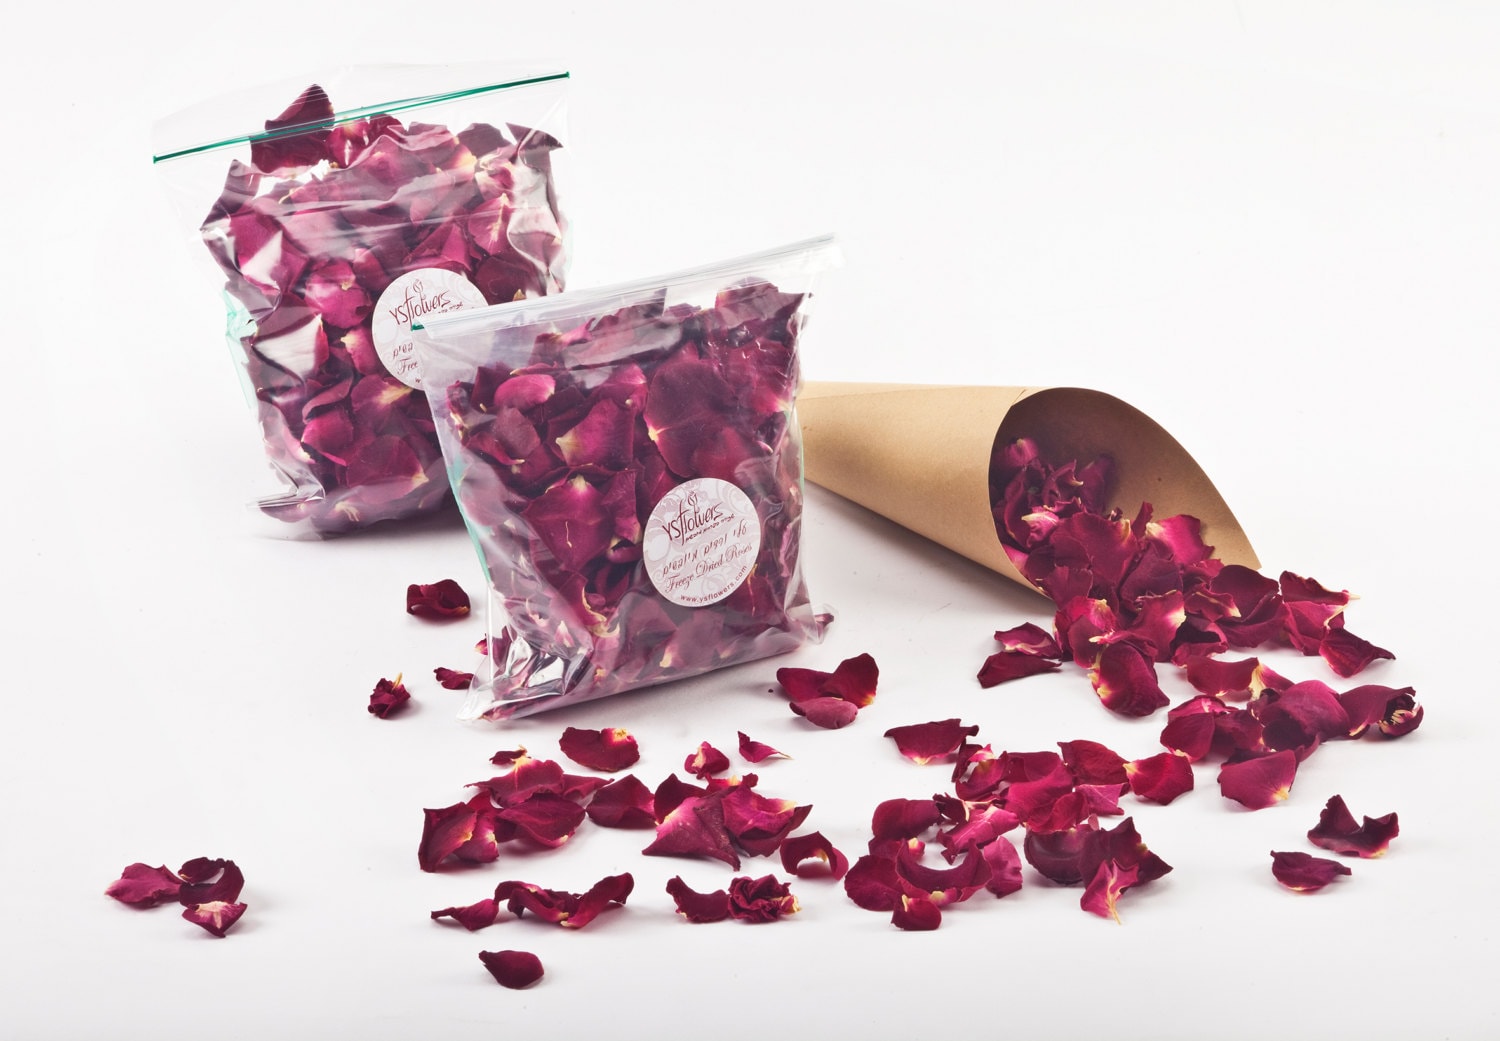 Freeze dried rose petals. 1 liter 5 cups of Second best